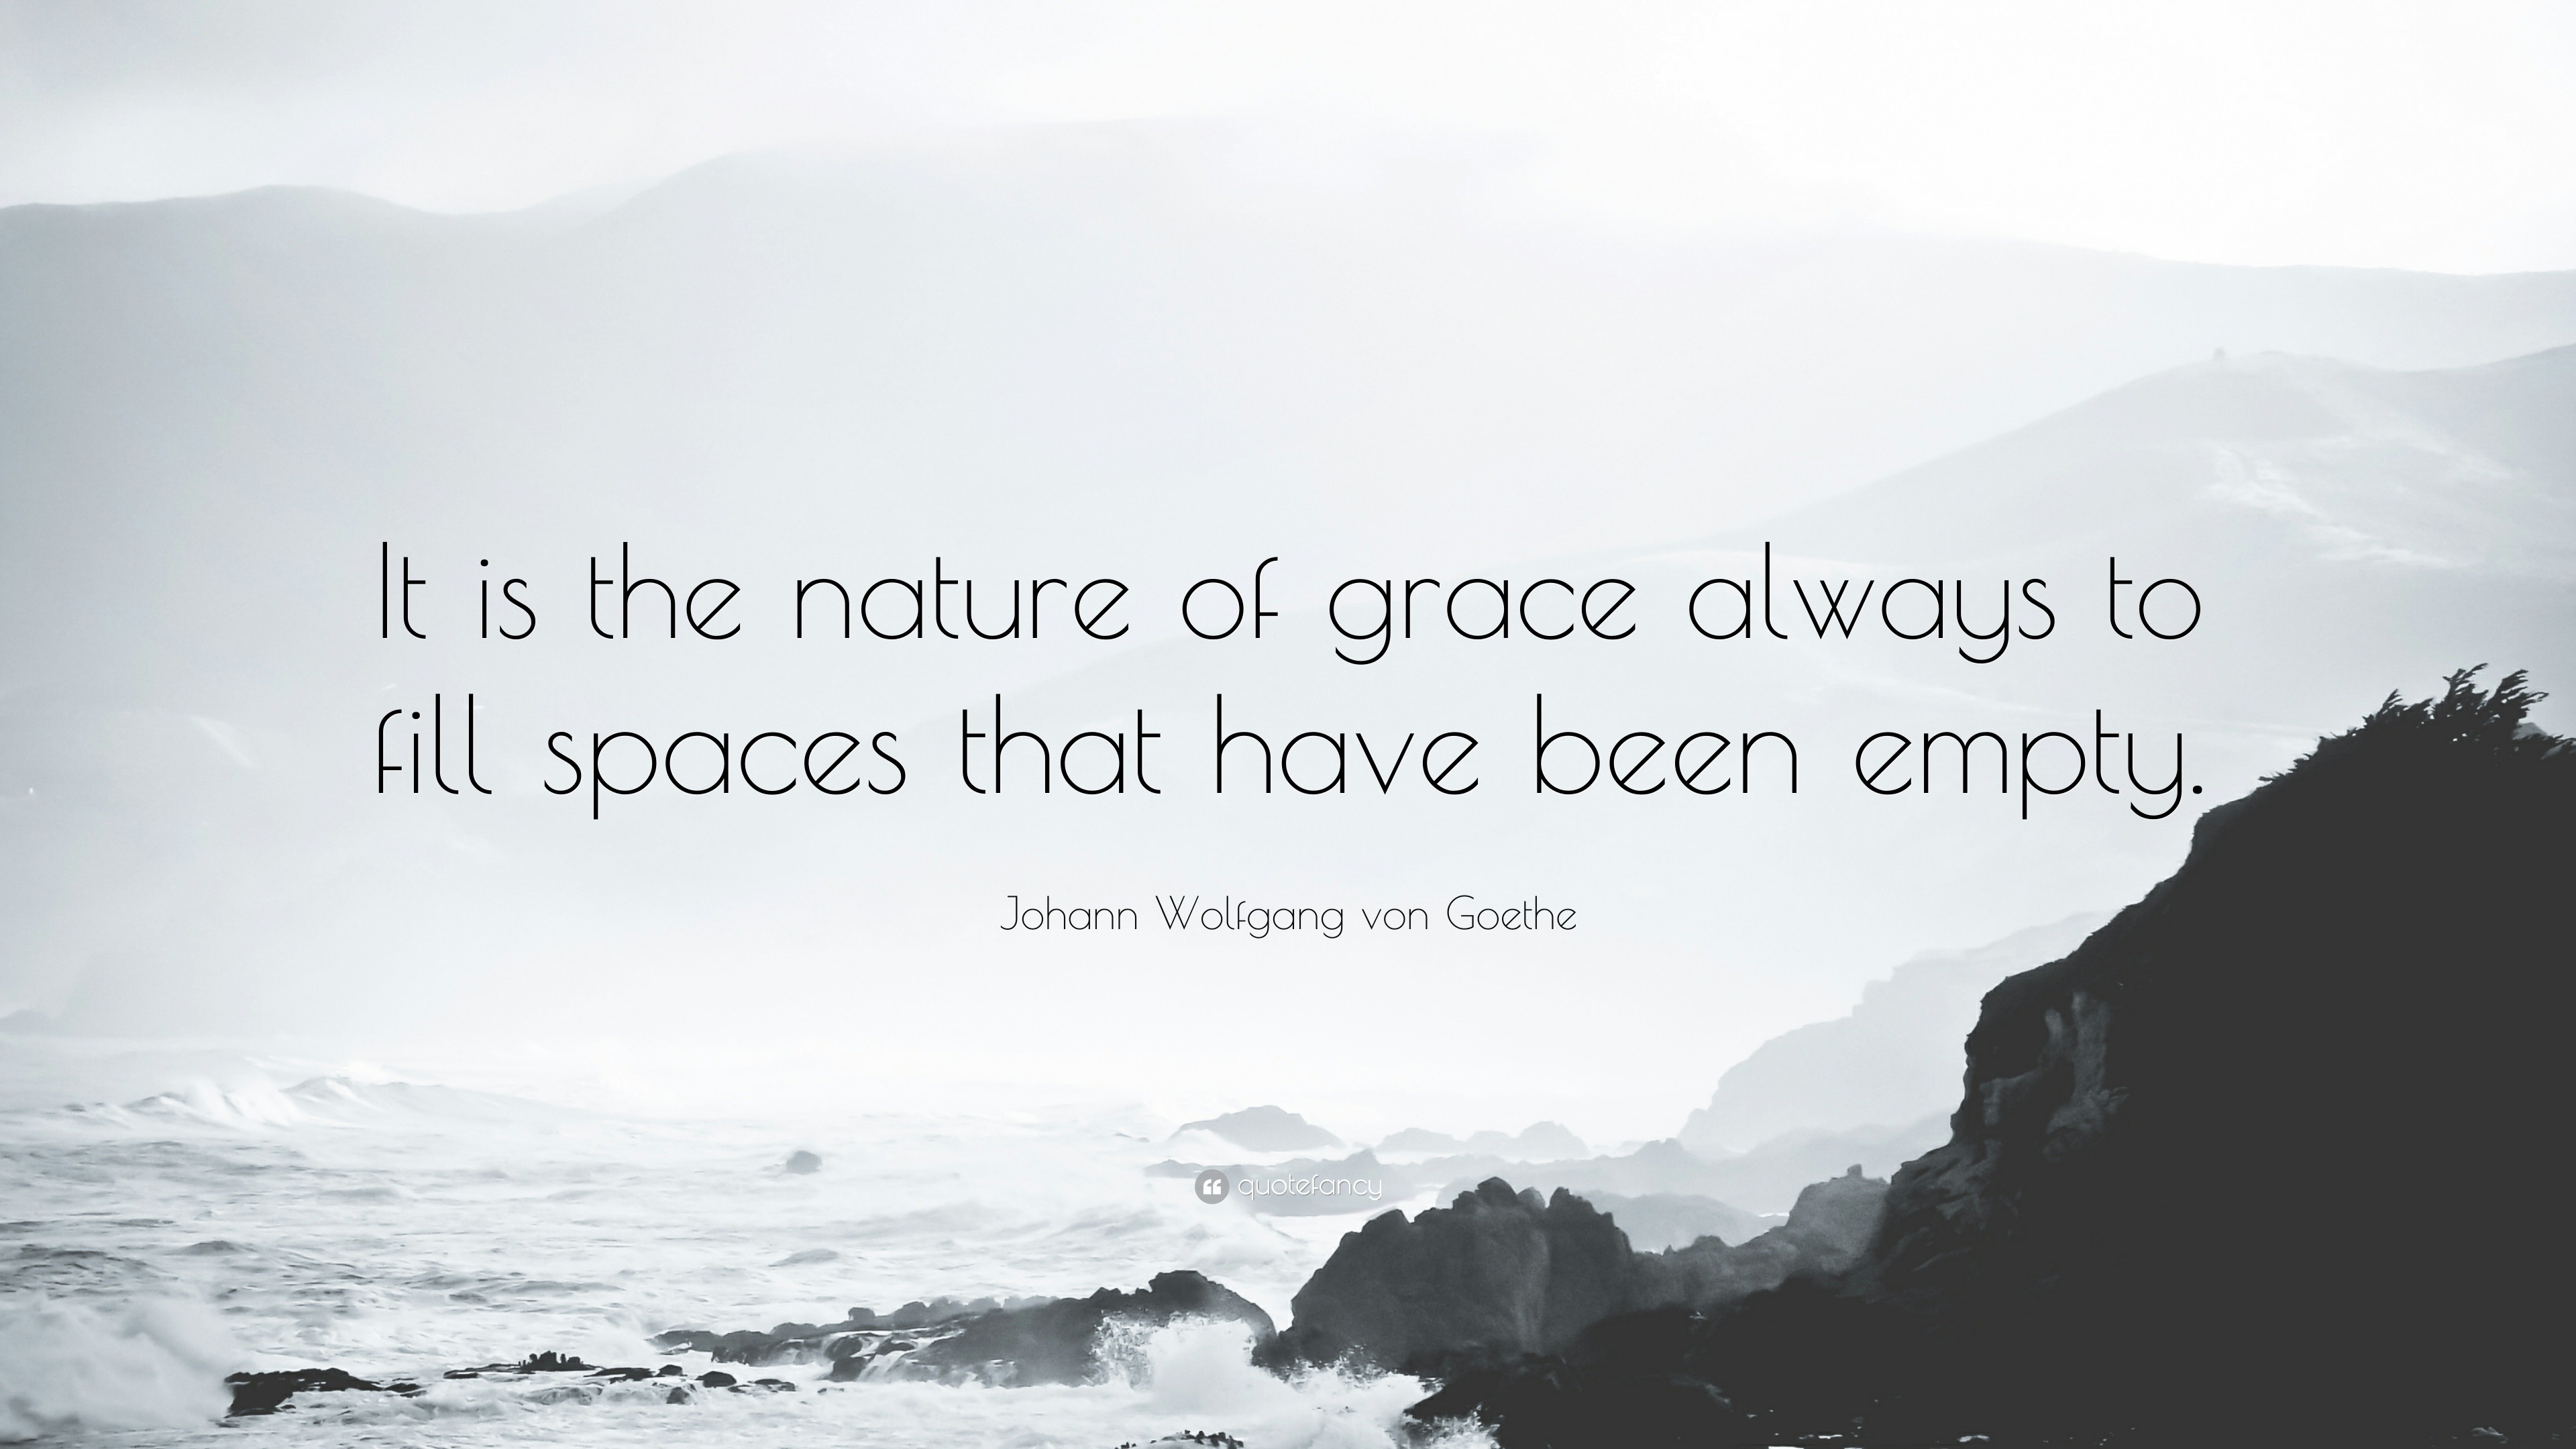 Johann Wolfgang von Goethe “It the nature of grace always to fill spaces that